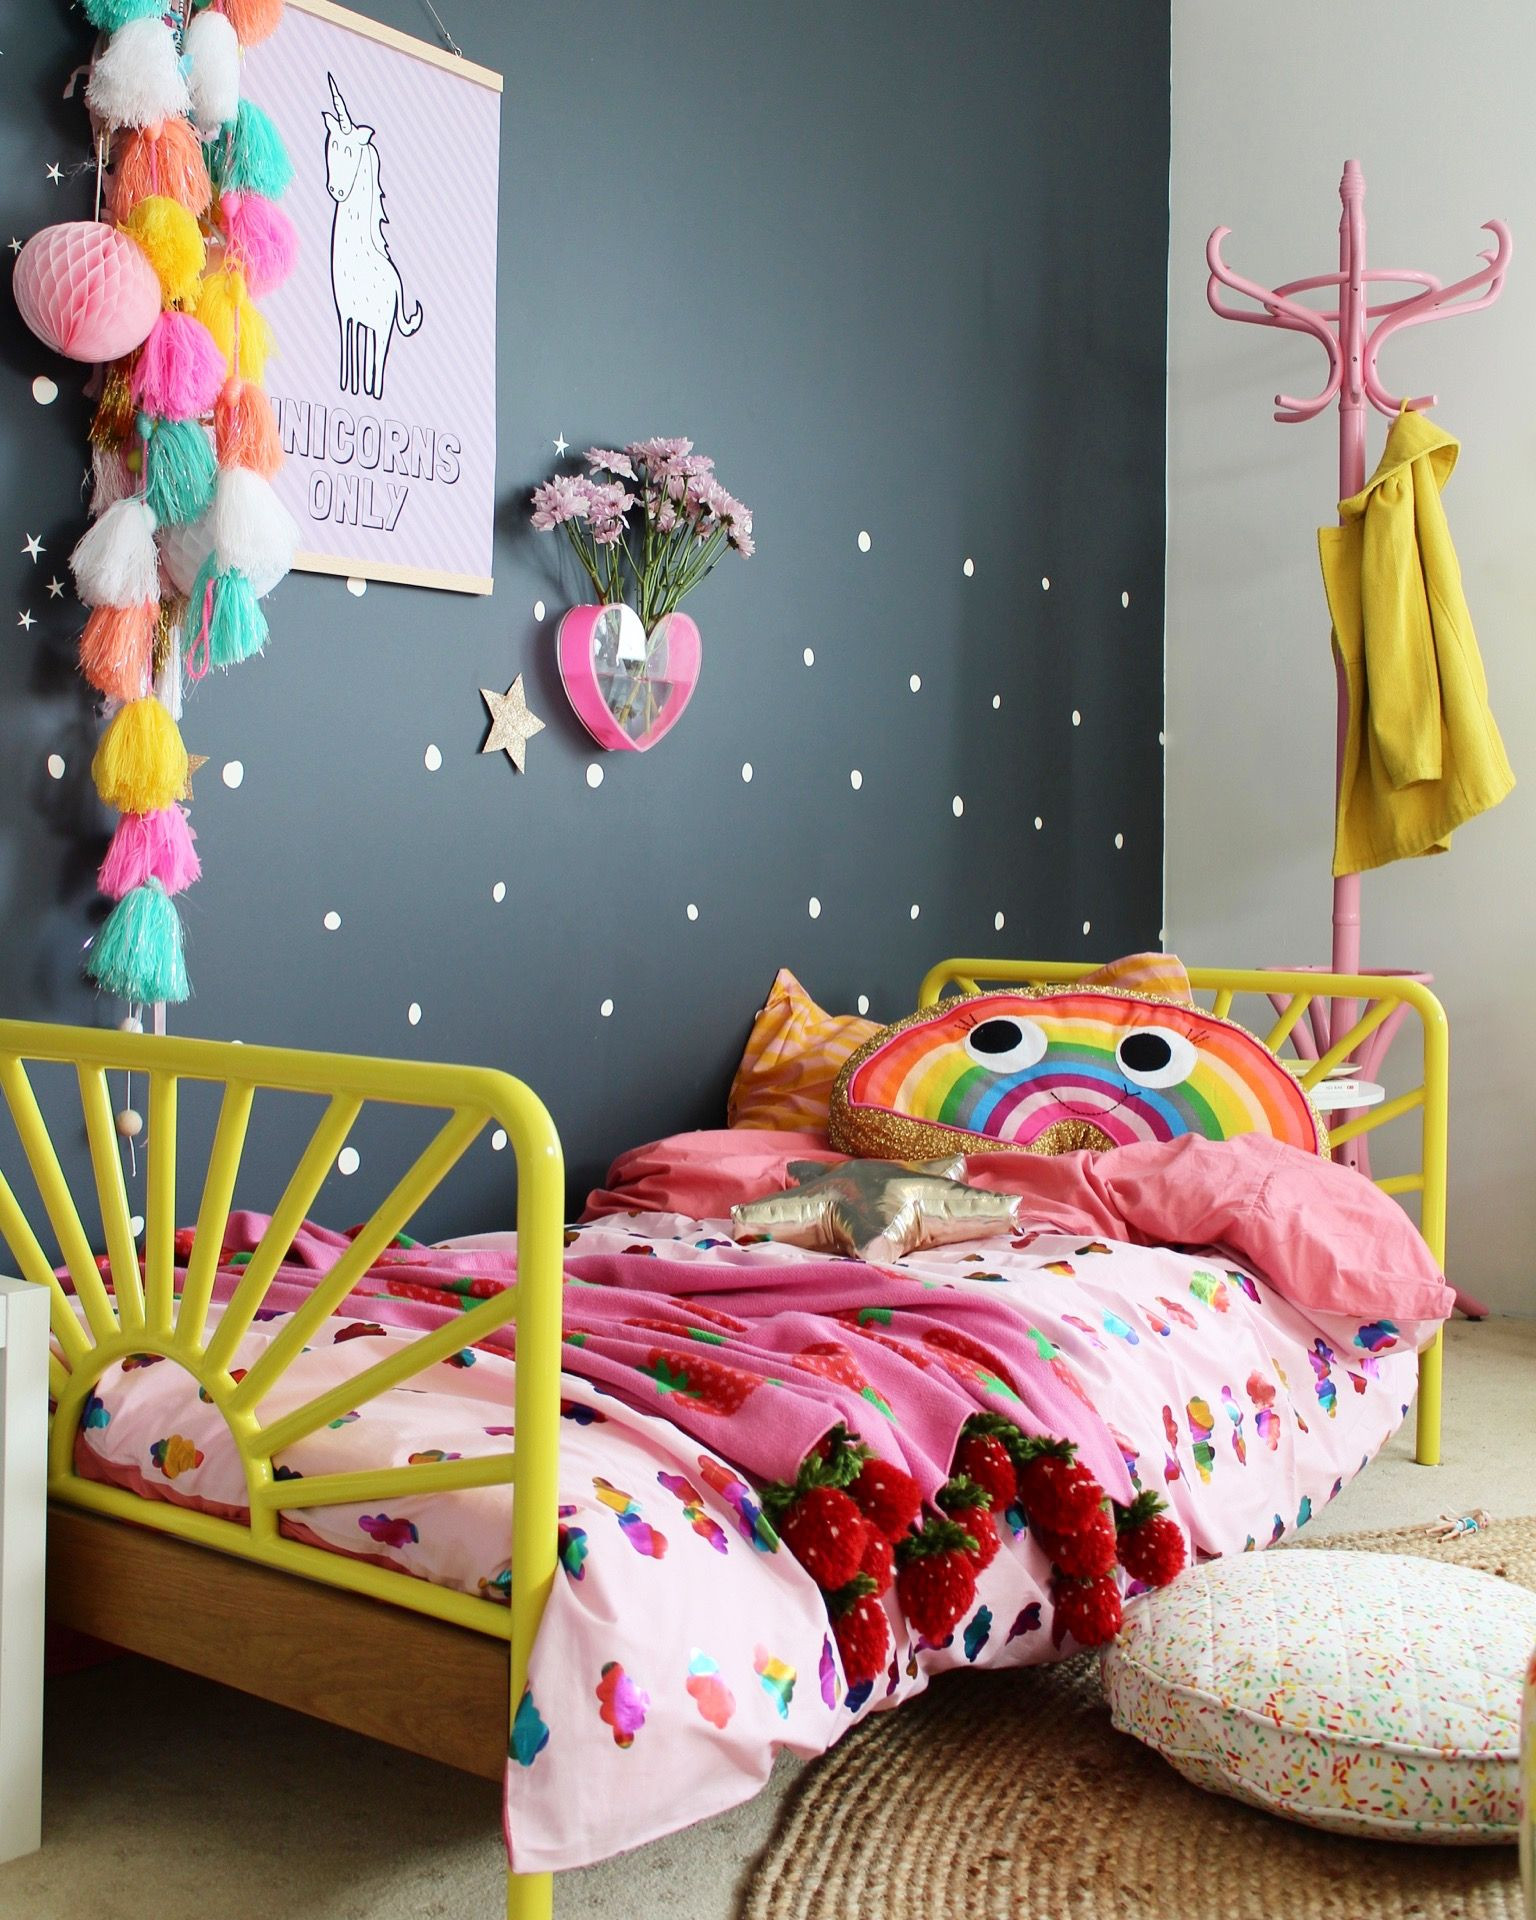 DIY For Kids Rooms
 25 Amazing Girls Room Decor Ideas for Teenagers